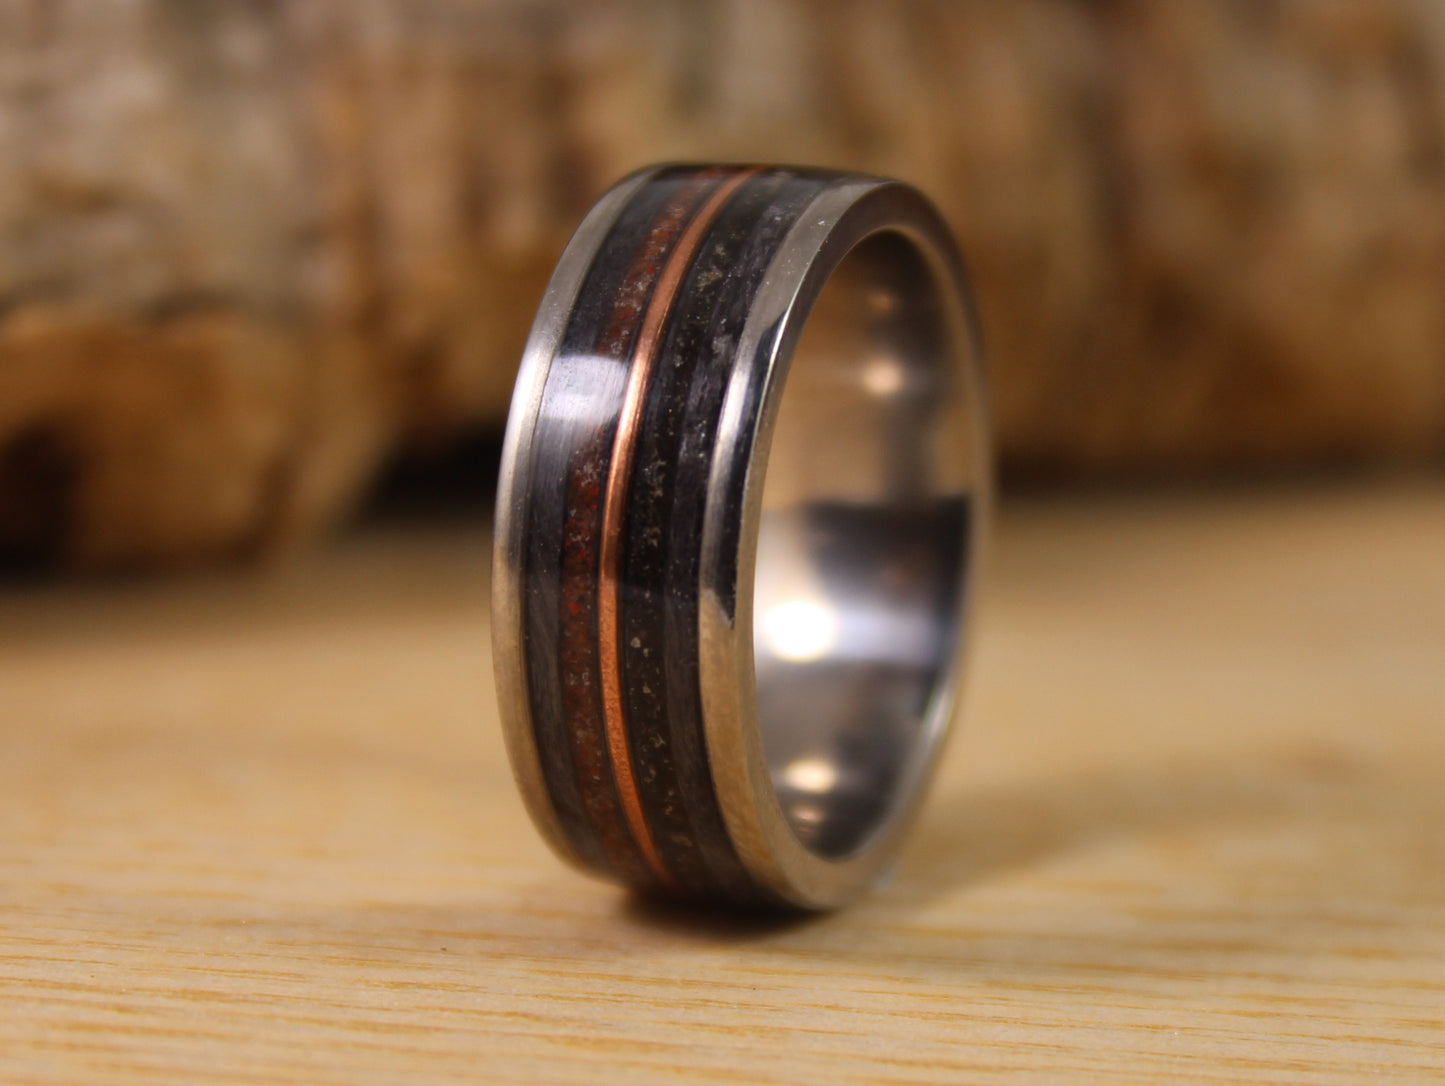 Steel Ring with Dinosaur Bone, Tektite Meteorite, Grey Maple and a Copper